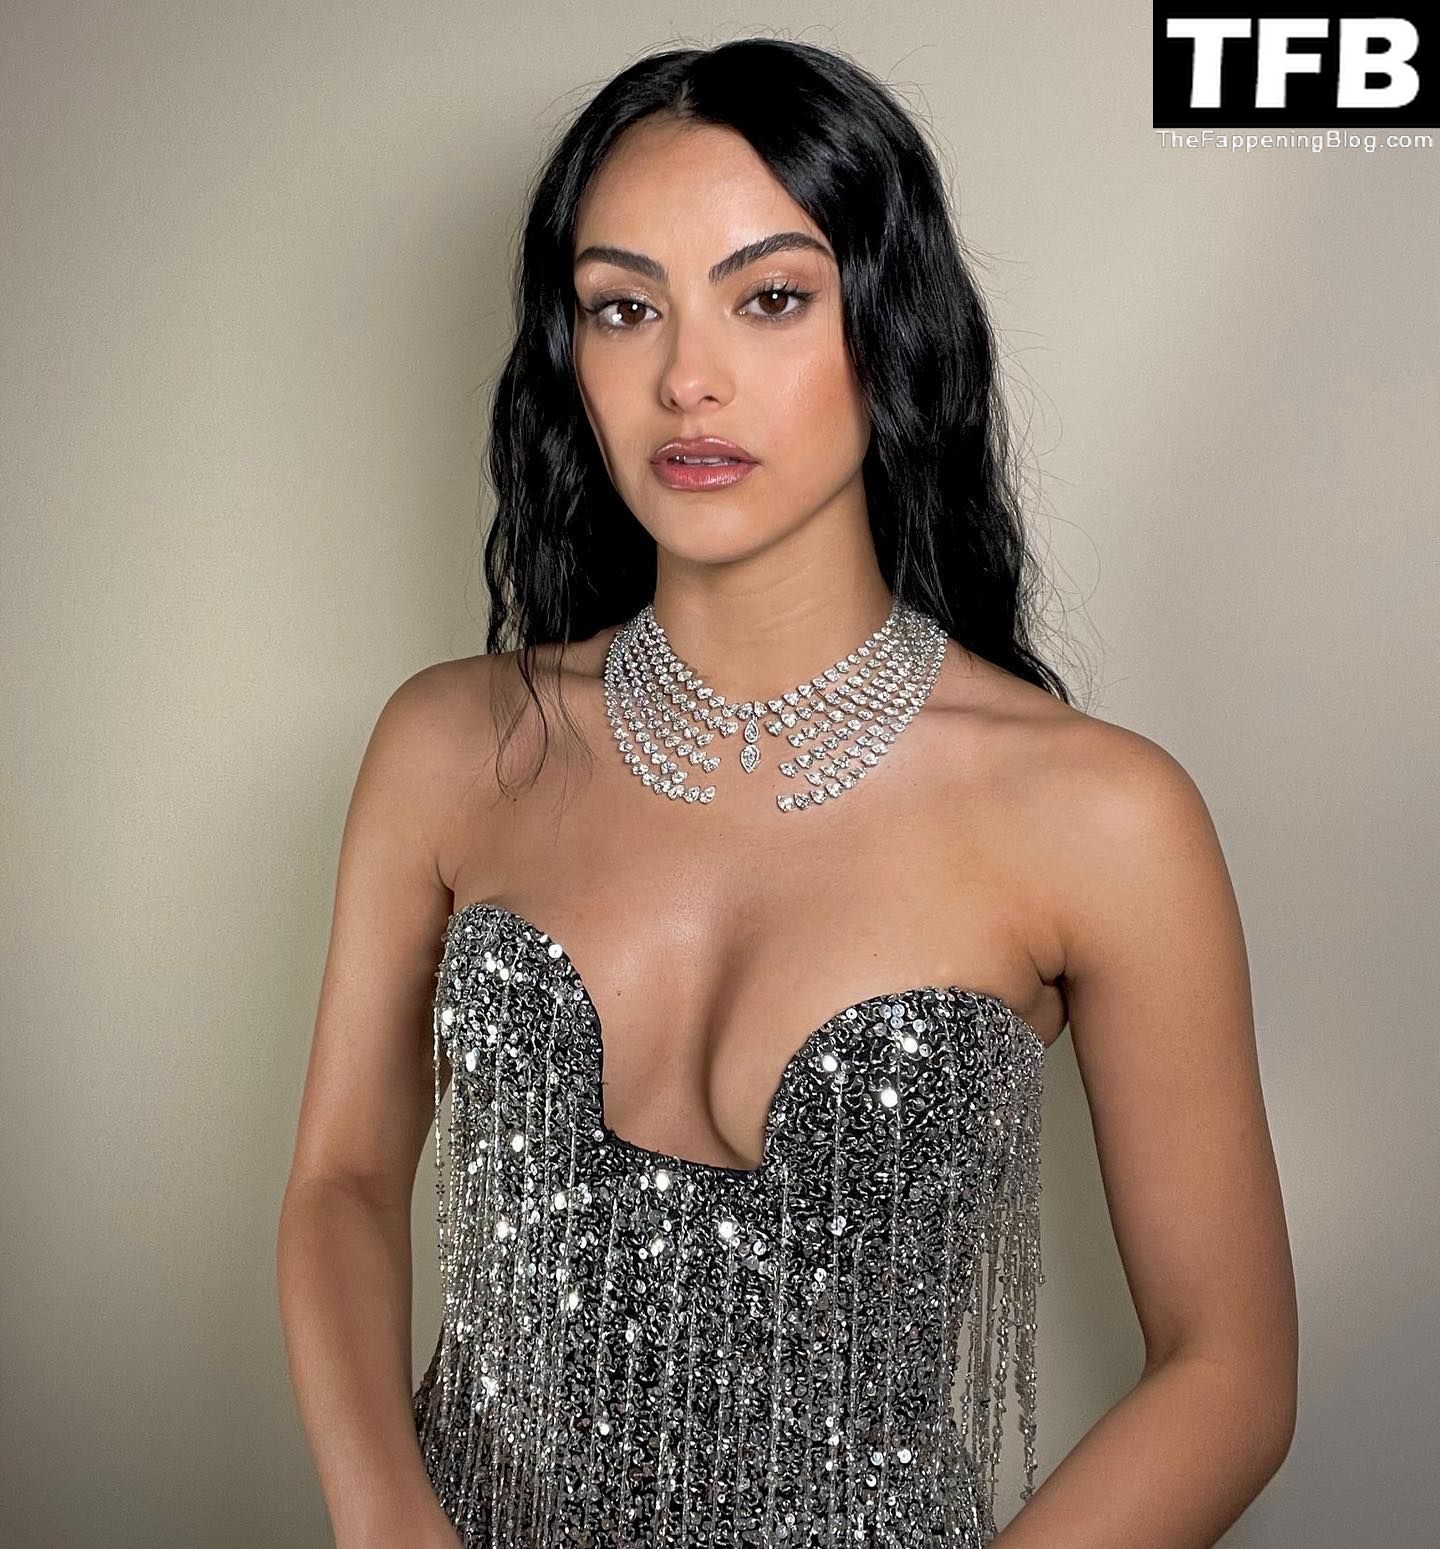 Camila-Mendes-Sexy-The-Fappening-Blog-19.jpg